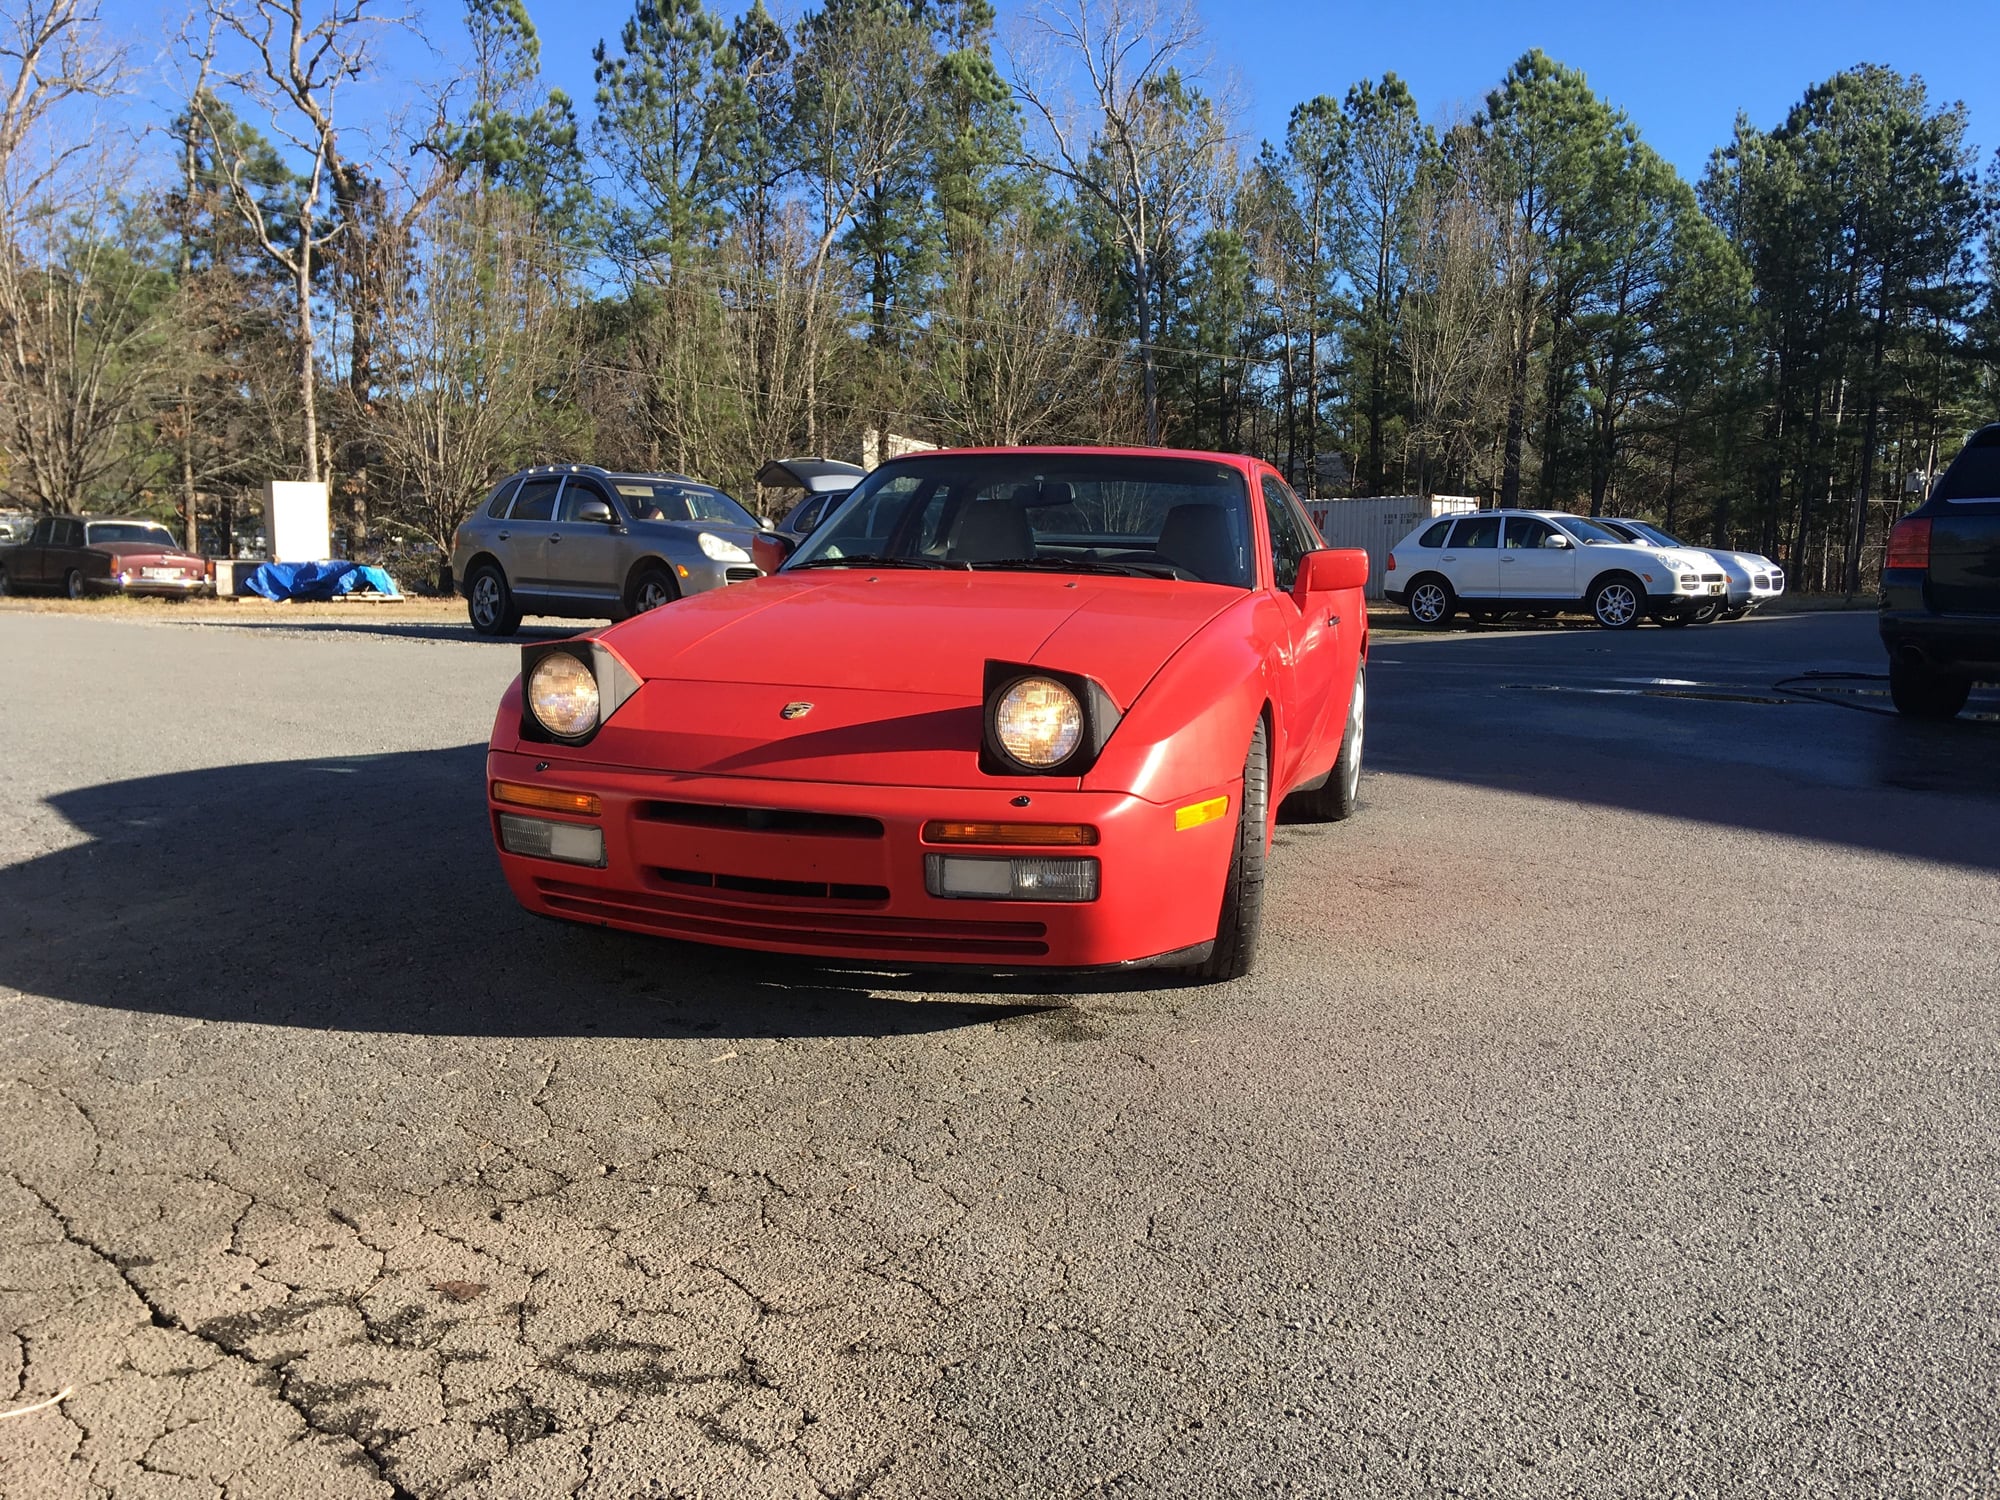 1986 Porsche 944 - Great 944 Turbo, needs a good home - Used - VIN WP0AA0950GN152485 - 151,600 Miles - 4 cyl - 2WD - Manual - Coupe - Red - North Little Rock, AR 72114, United States